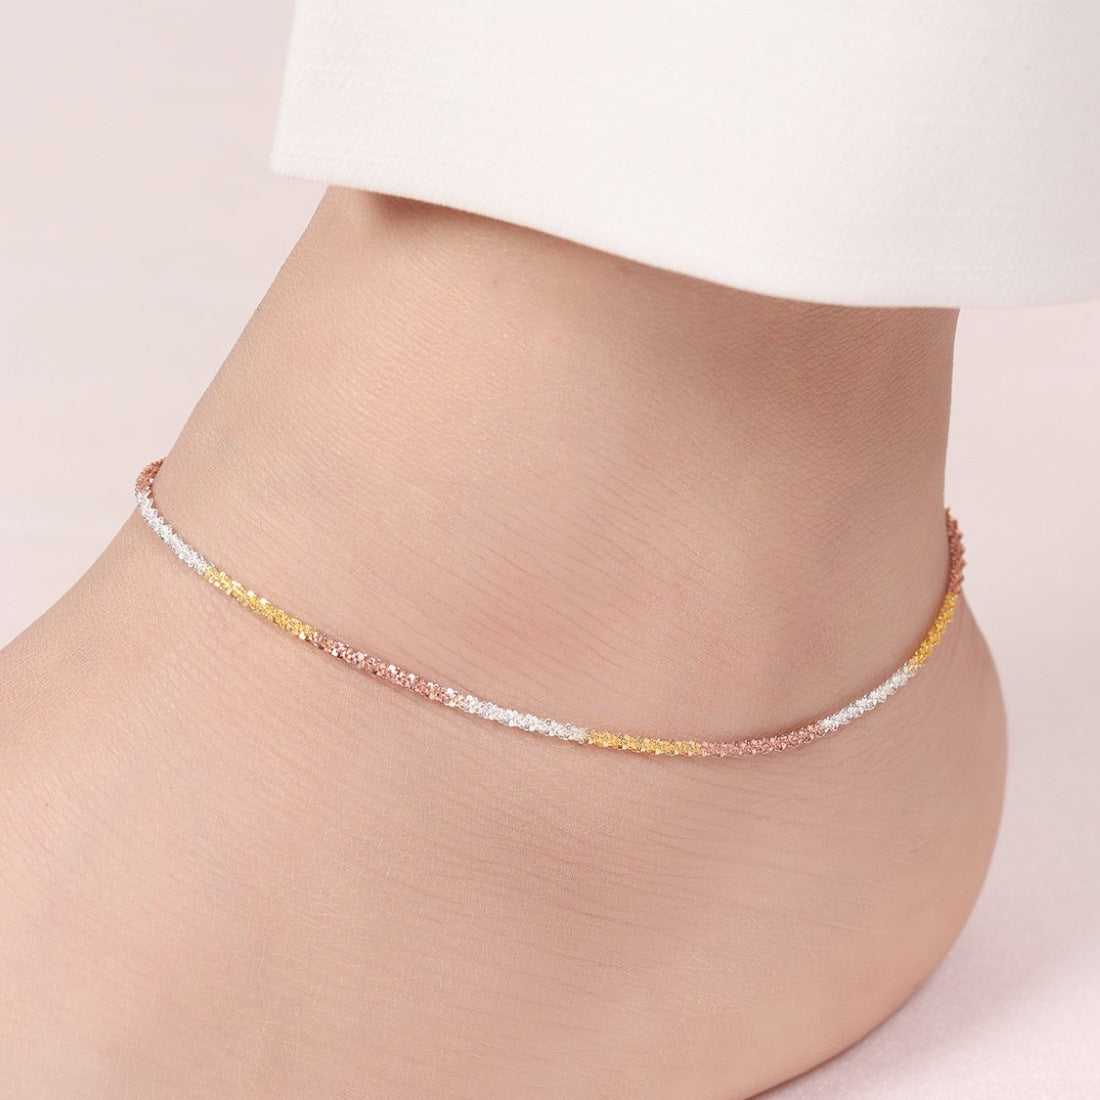 Triple Tone Weave Chain 925 Sterling Silver Anklet